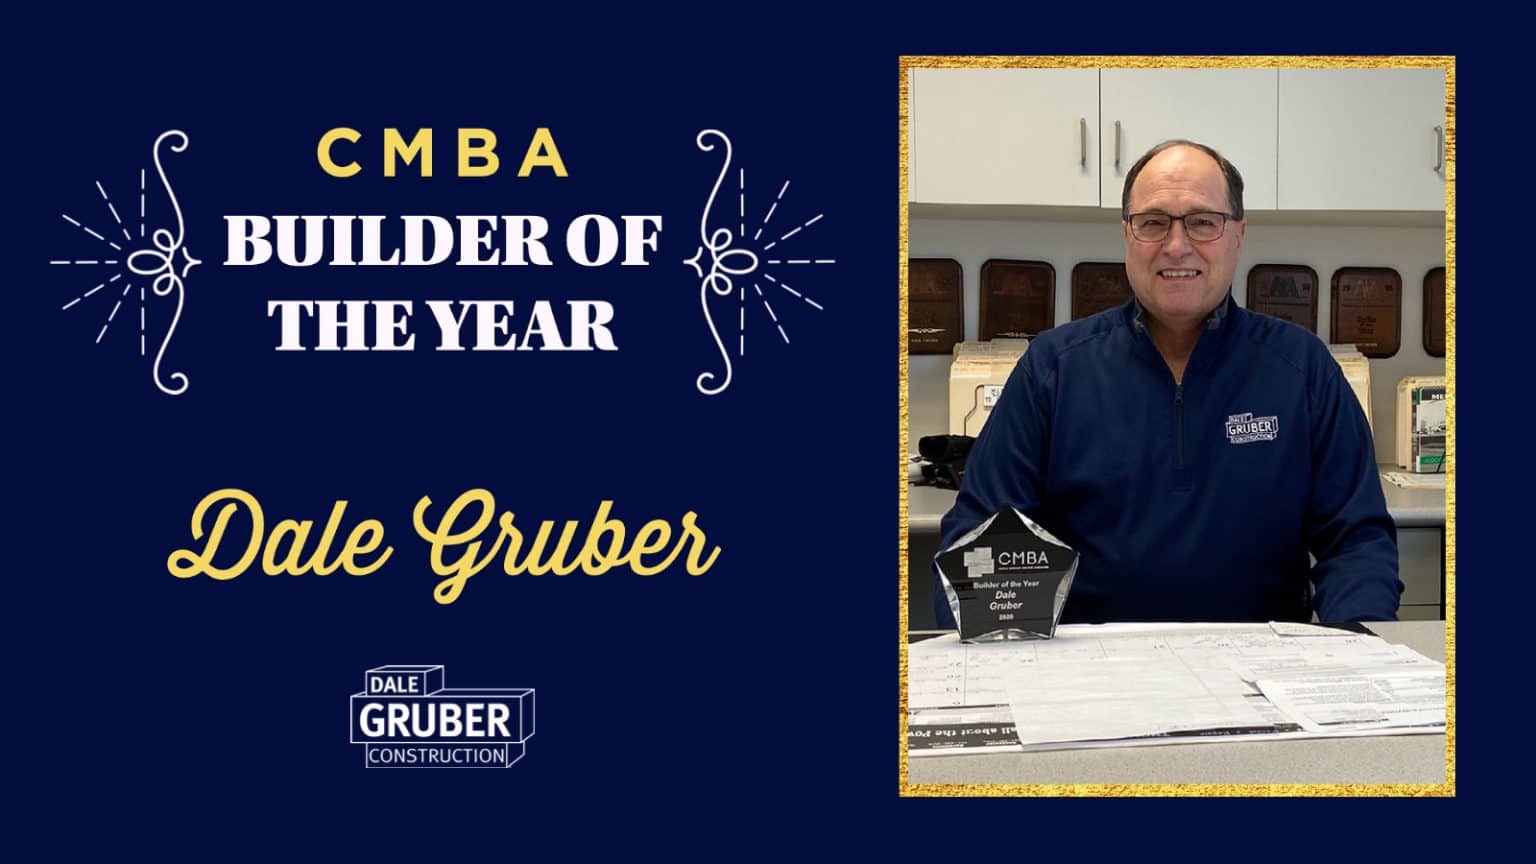 Dale Gruber Awarded CMBA Builder of the Year!